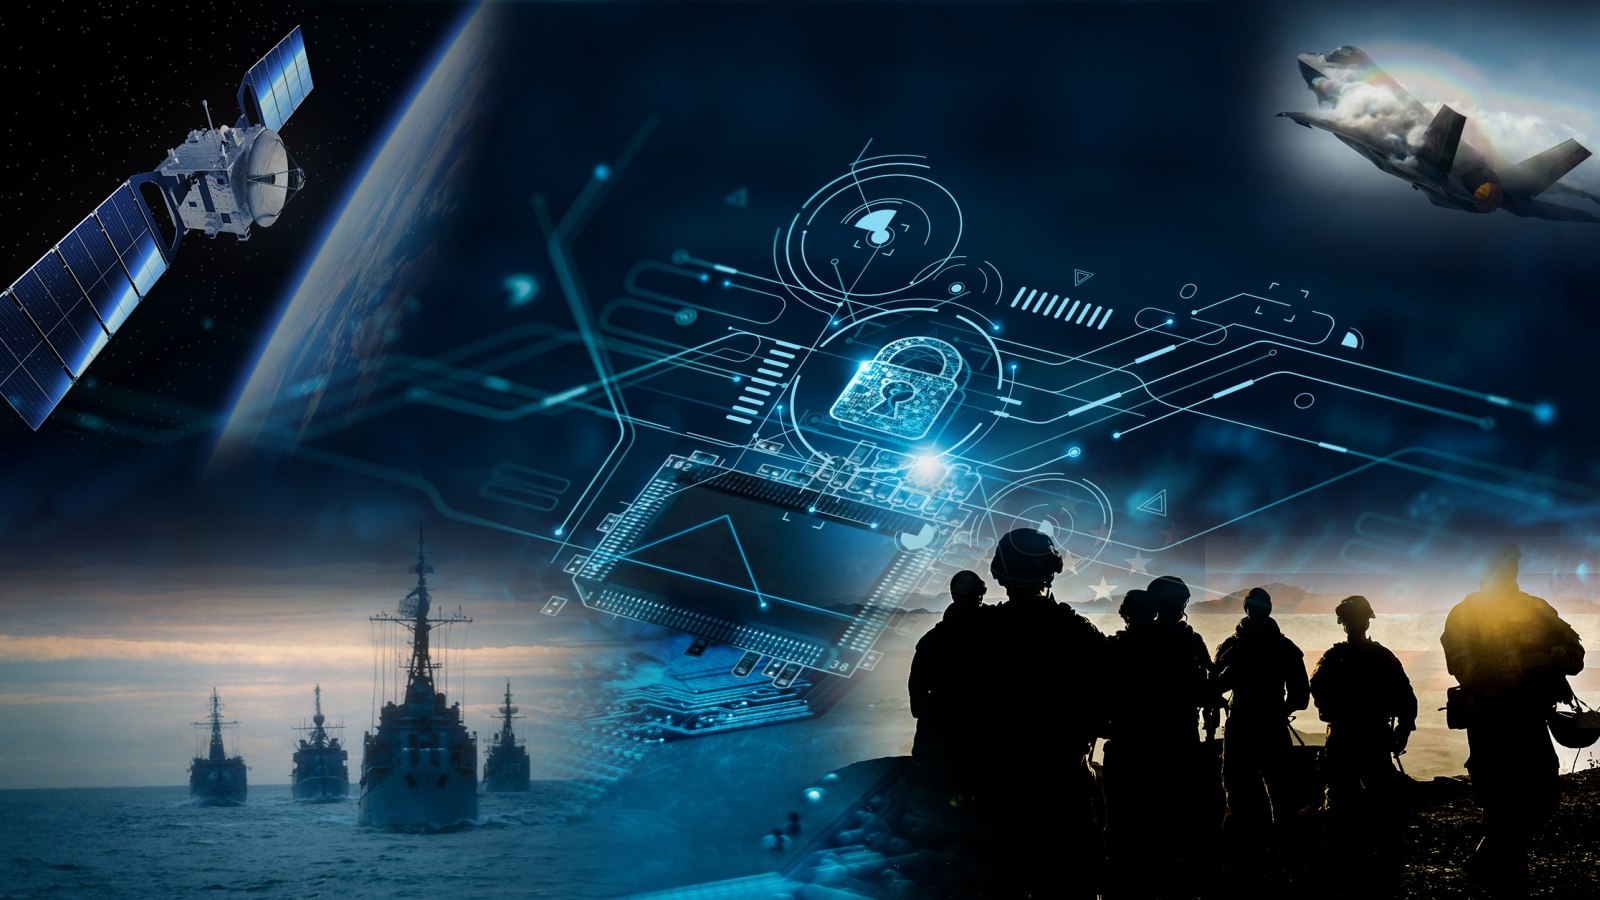 a collage of images showing a satellite, a jet, a warship, and soldiers on the ground. In the middle of the collage is an illustration of a circuit board.